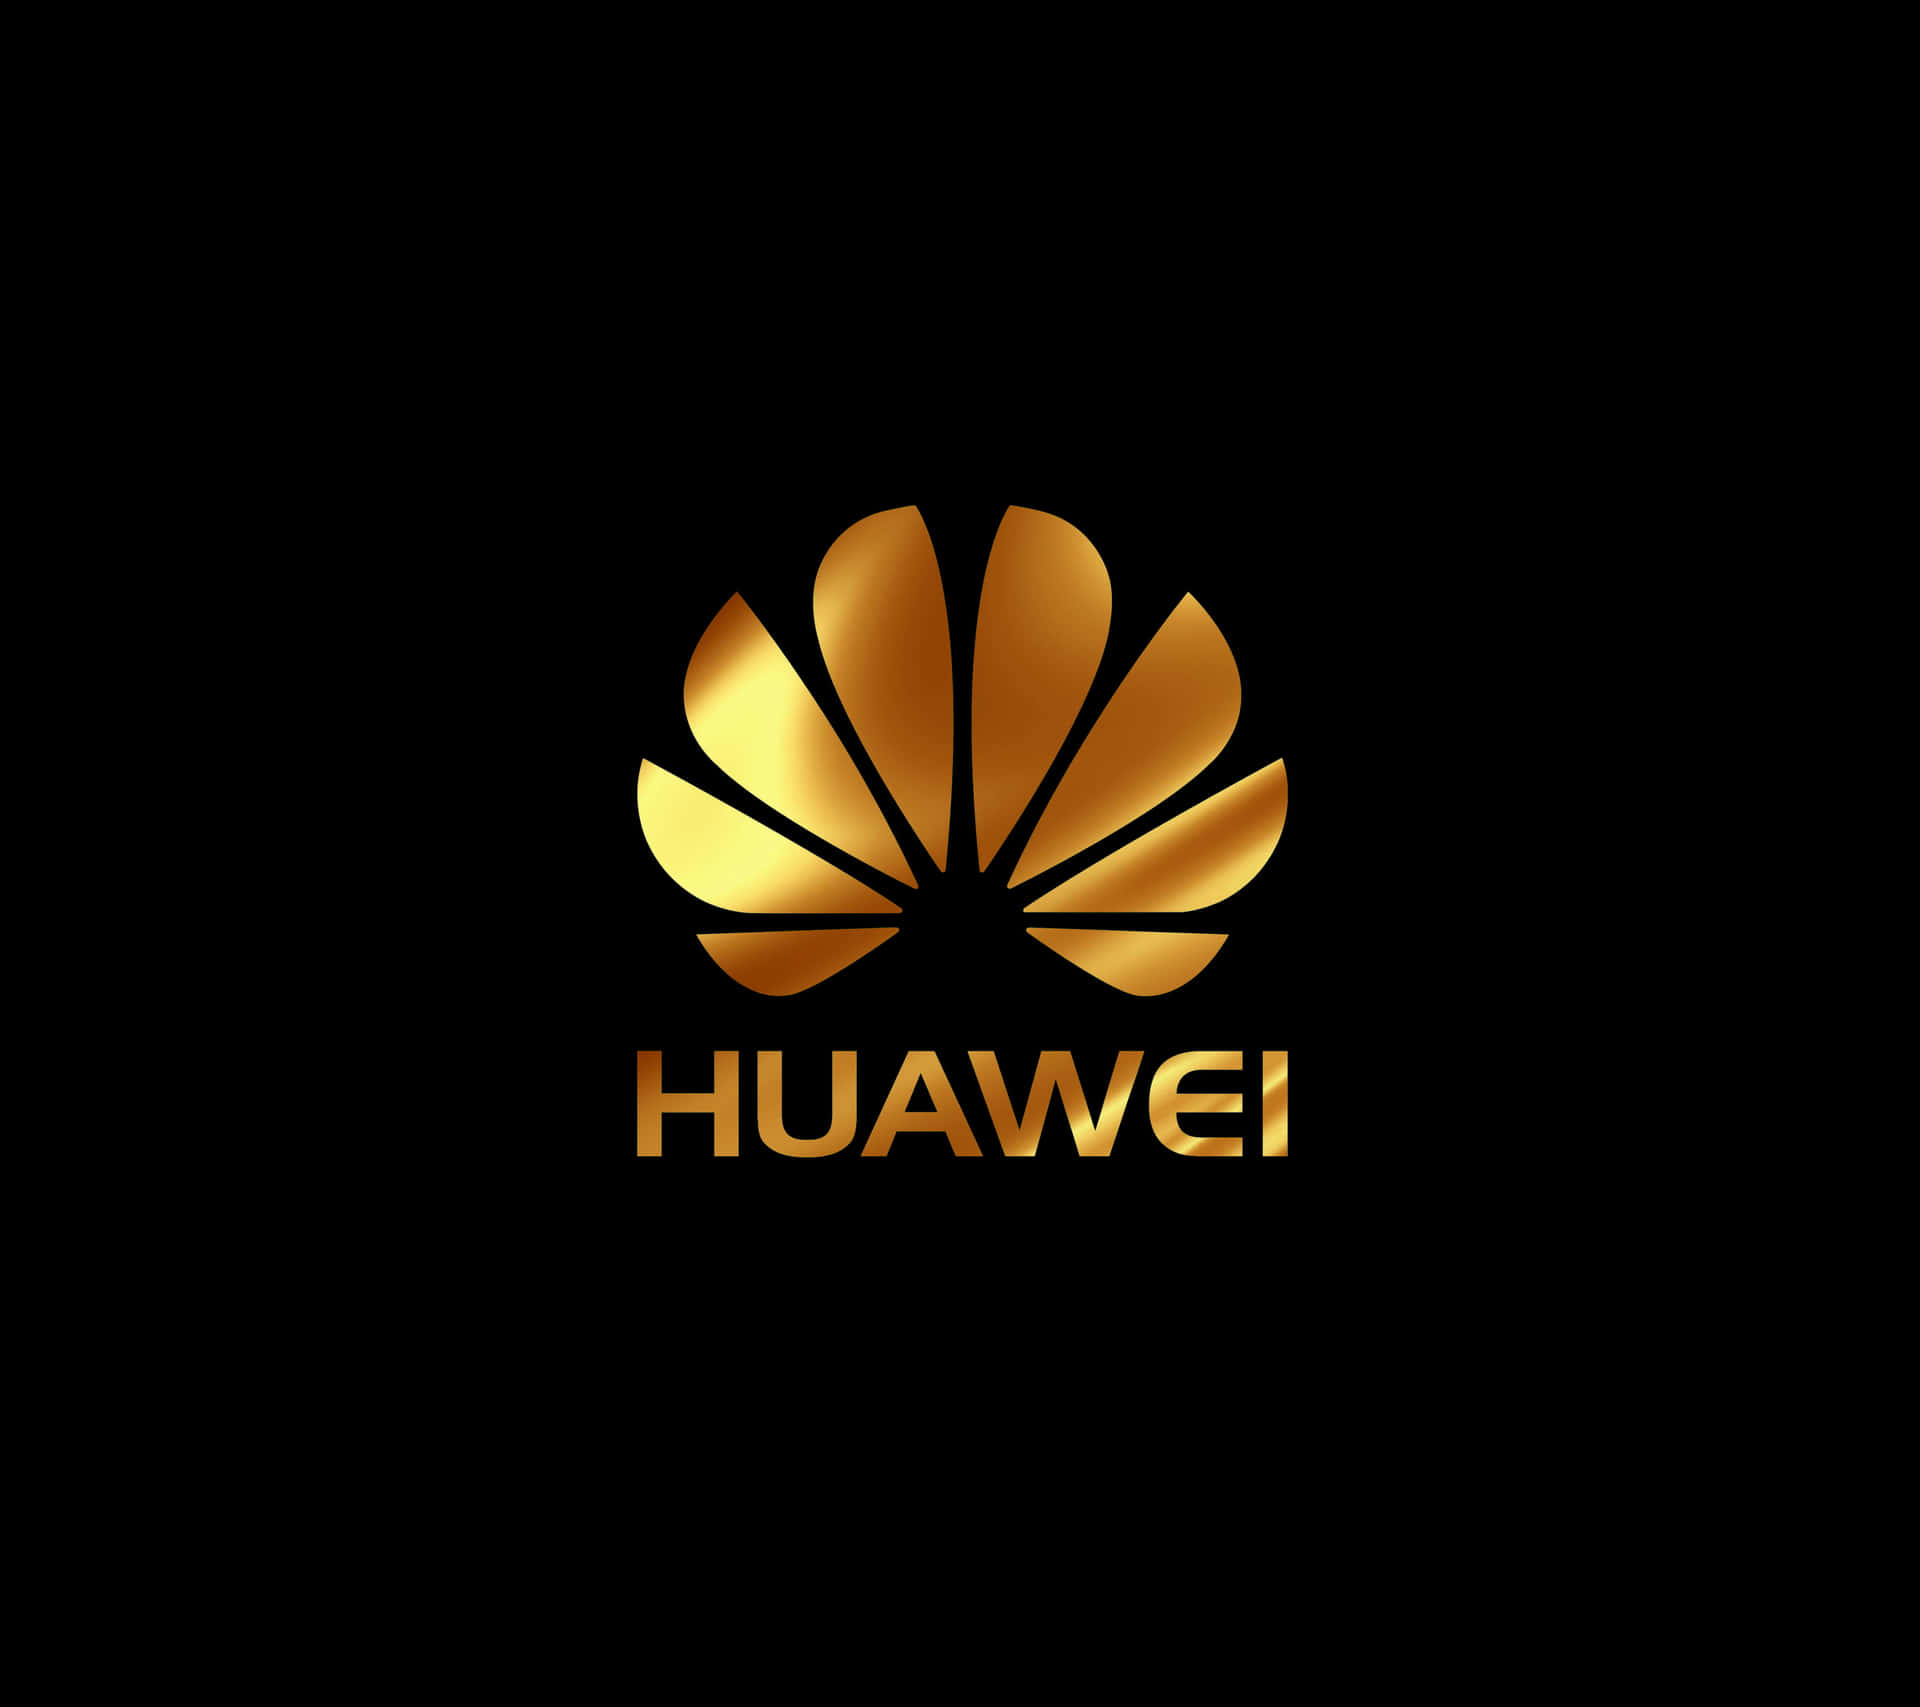 Show Your Style with the Huawei Phone